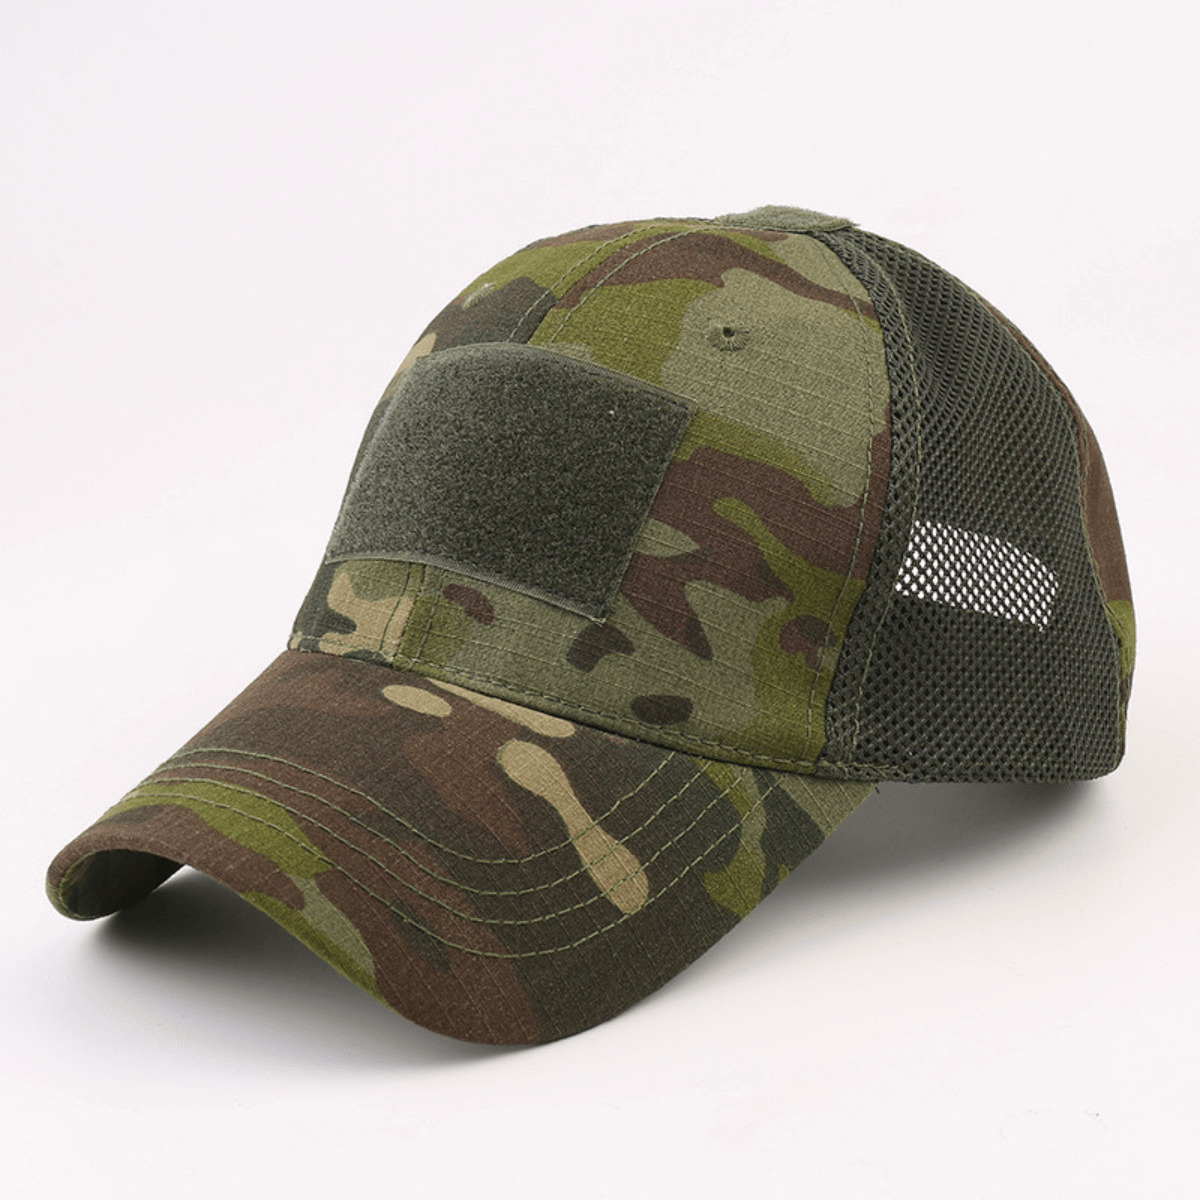 Tactical-Style Patch Hat With Adjustable Strap - BDU Camo